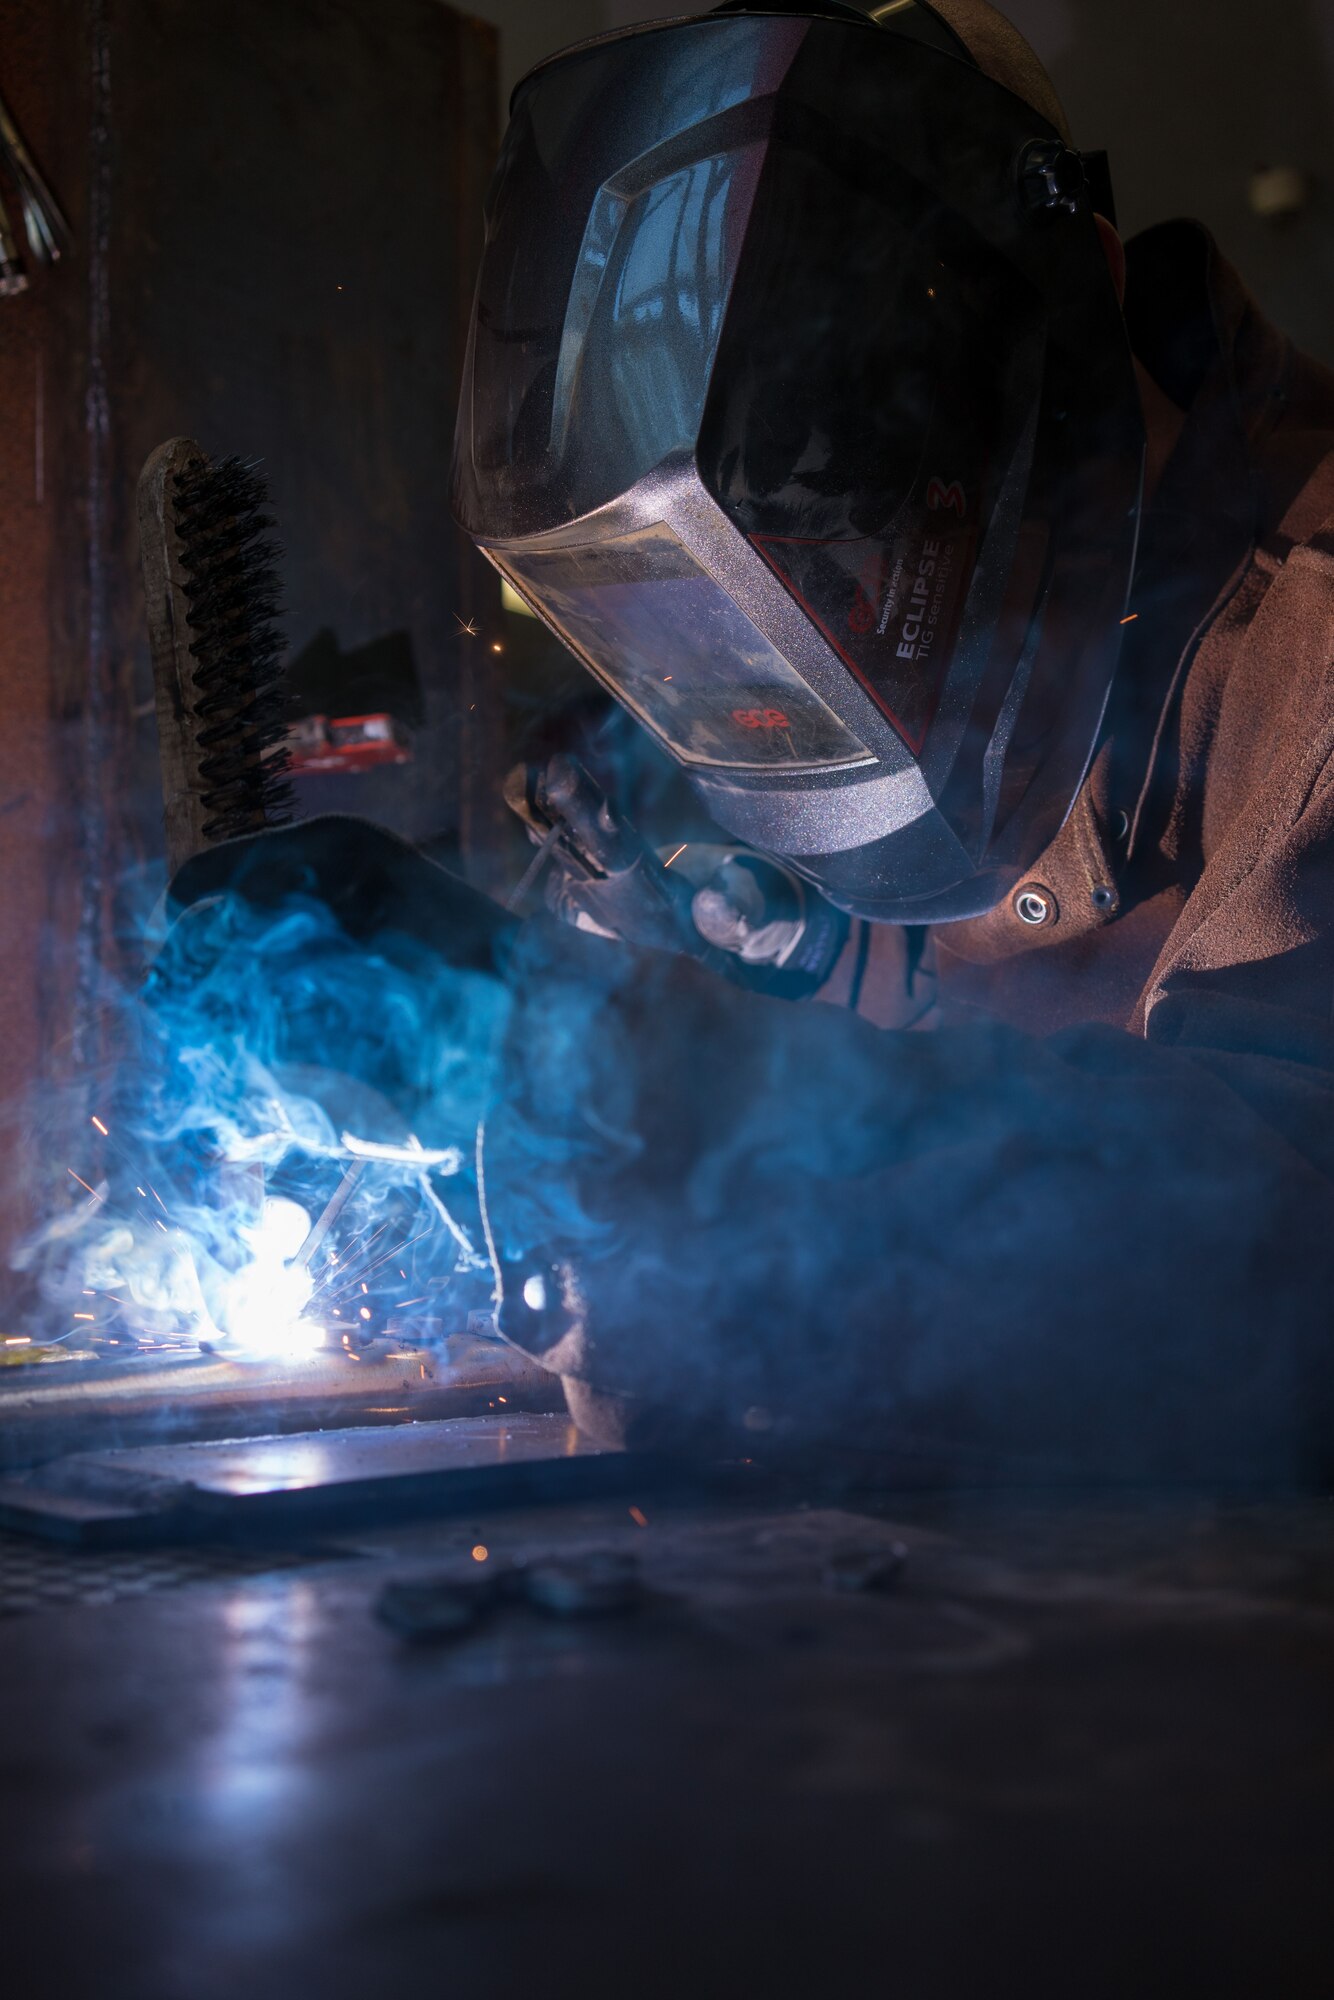 U.S. Air Force Master Sgt. Tyler Harrison, a structures craftsman with the 116th Air Control Wing (ACW), 116th Civil Engineer Squadron (CES), Georgia Air National Guard (GANG), practices stick welding during United States Air Forces Europe (USAFE) Silver Flag 2017 at Ramstein Air Base, Germany, June 8, 2017.